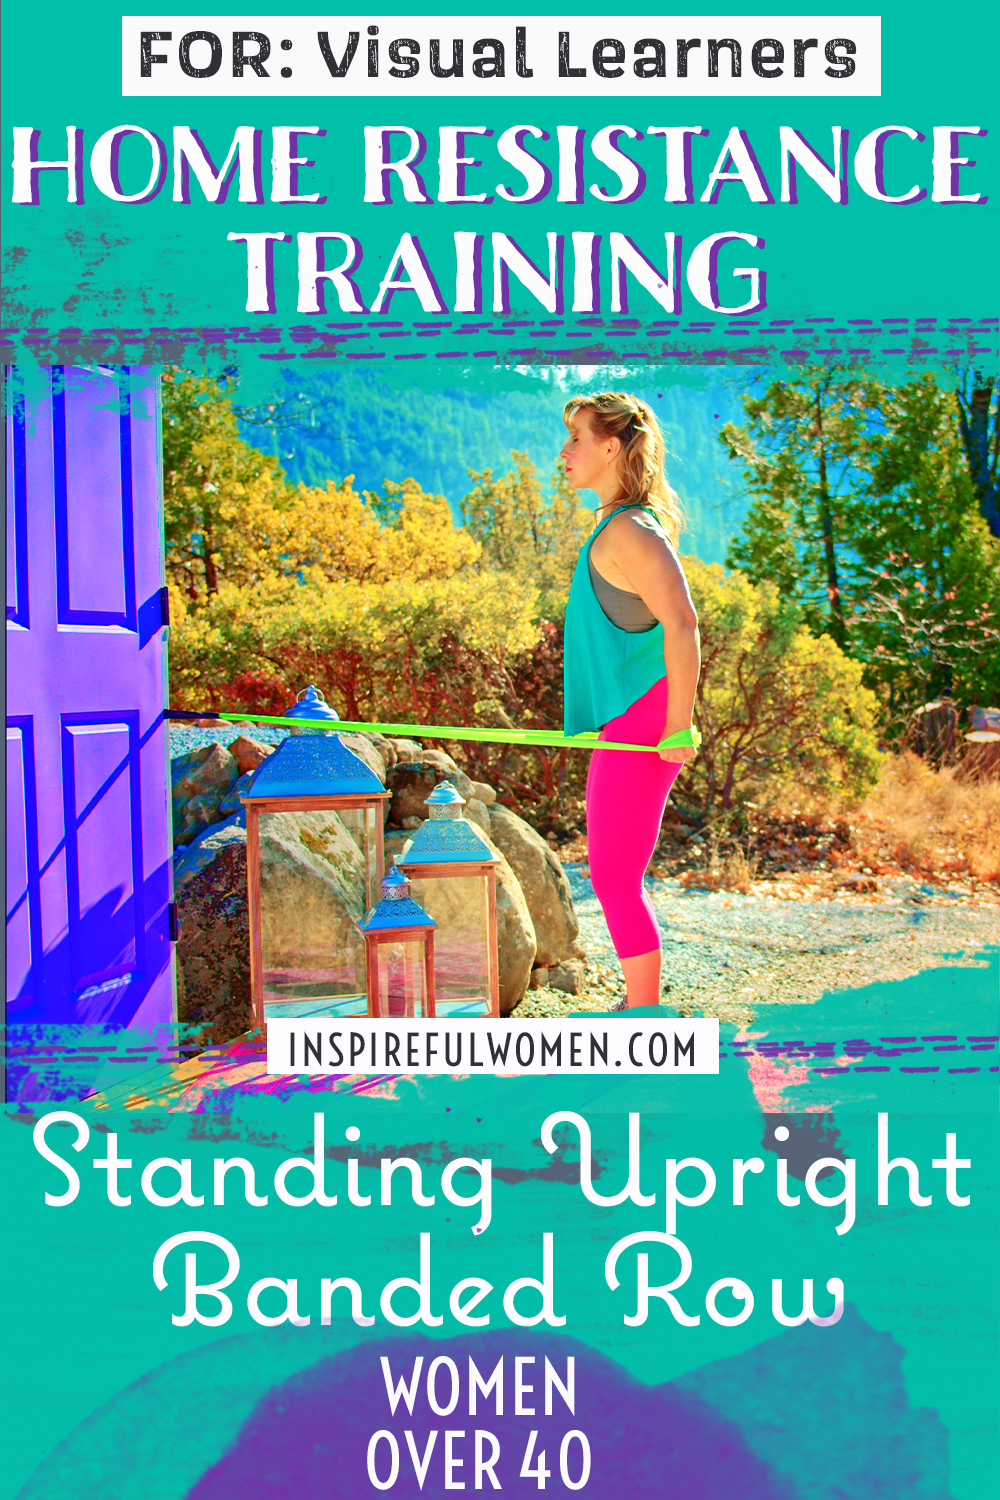 upright-torso-resistance-band-anchored-row-back-exercise-tutorial-at-home-women-40+